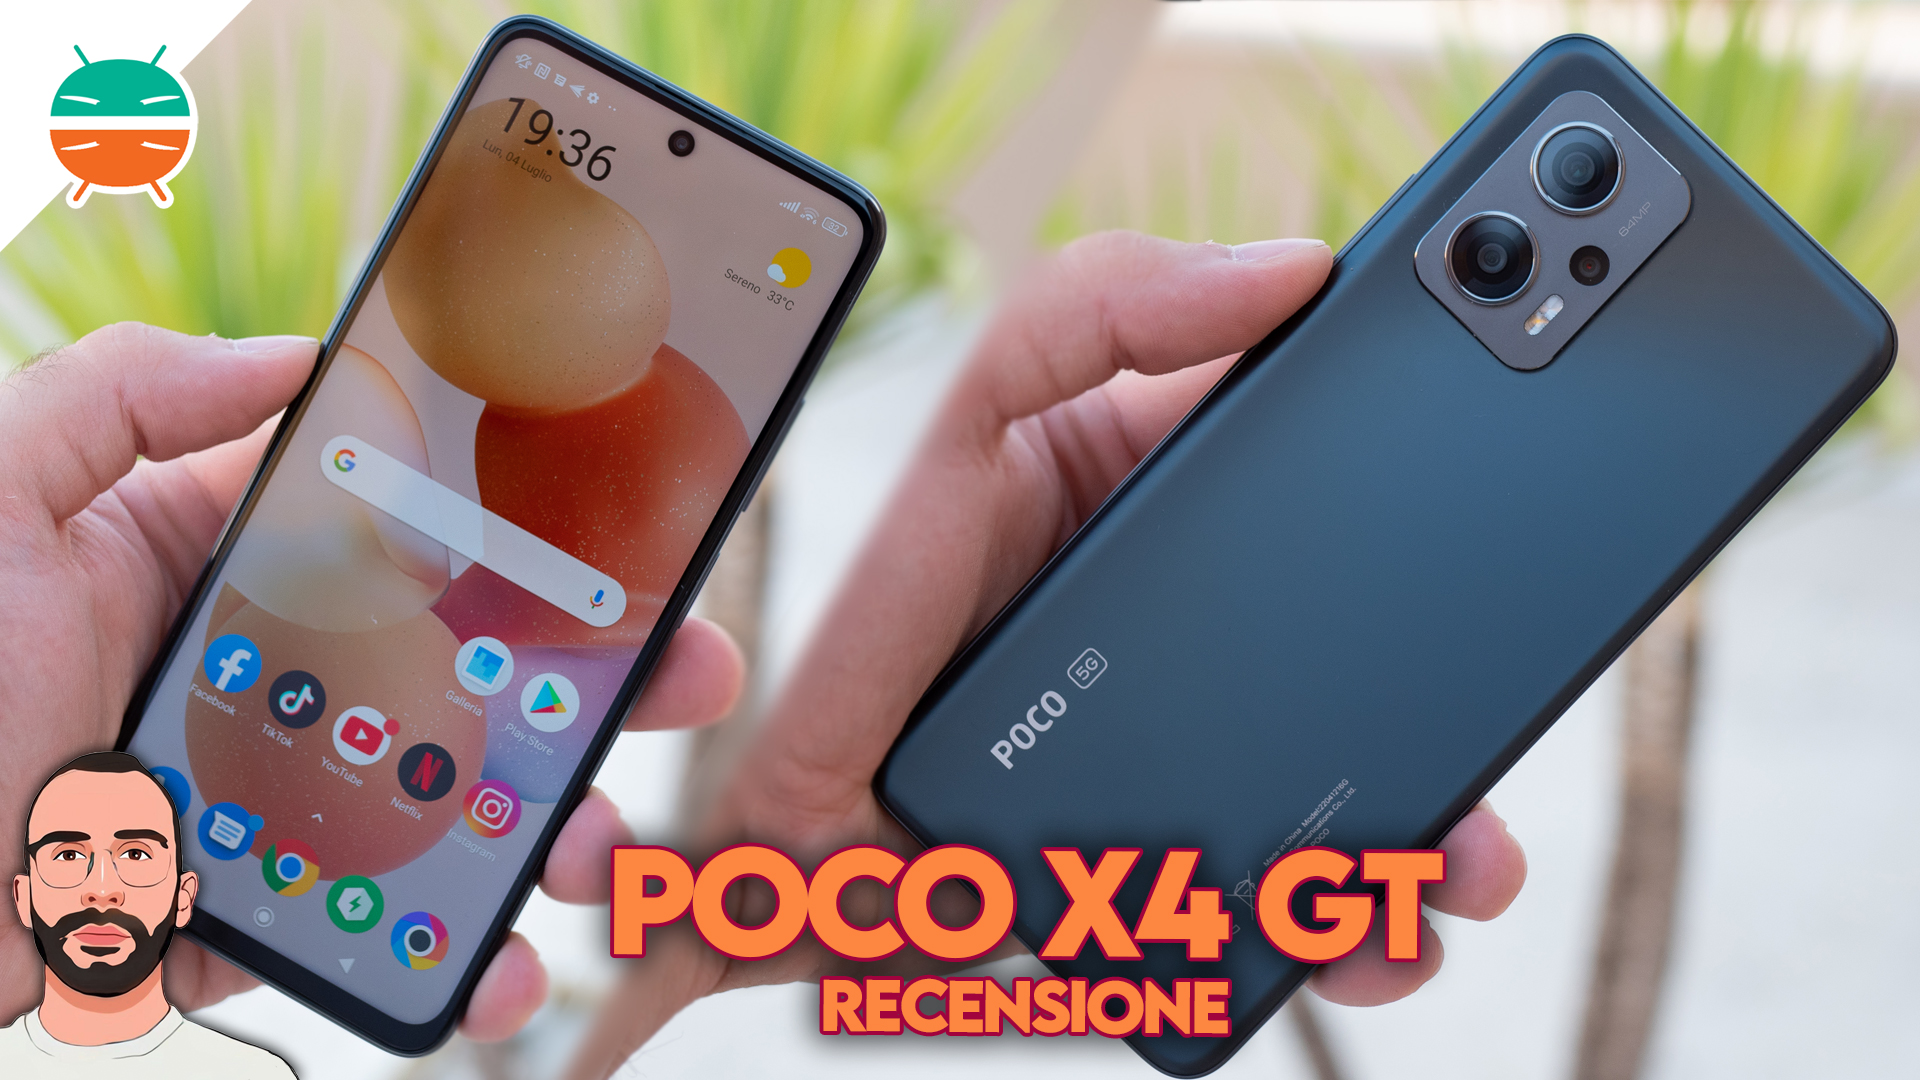 Review POCO X4 GT: at € 299 on offer is a recommended choice